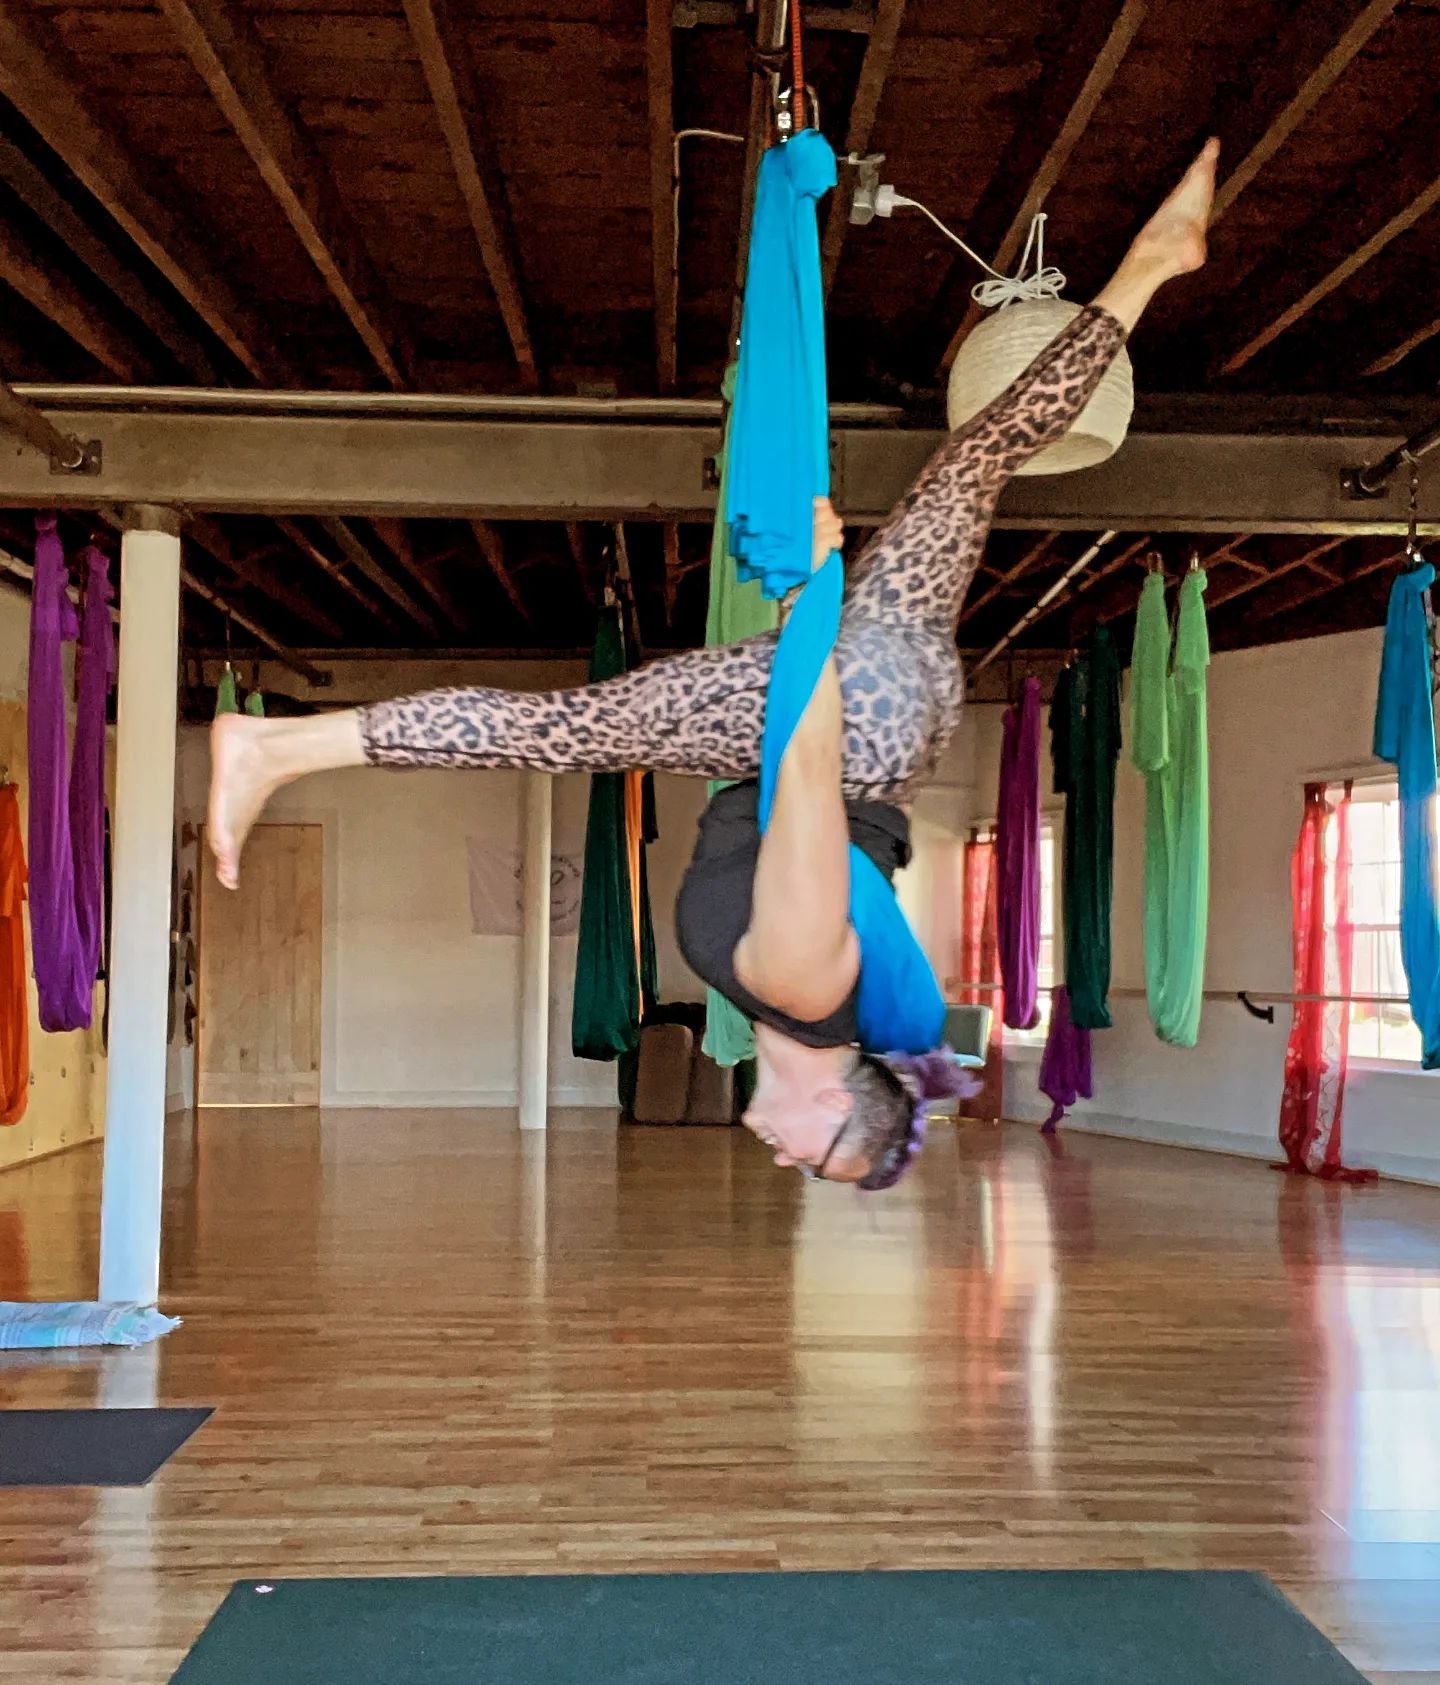 May Special
Weekday private sessions 1:1 or 1:2 
$75/$100
Link on the website, DM or email &amp; connect with a great teacher like
@aliciamjeffords pictured
Alicia teaches Tuesday &amp; may be available on other days too! 

Aerial or non aerial Yoga 